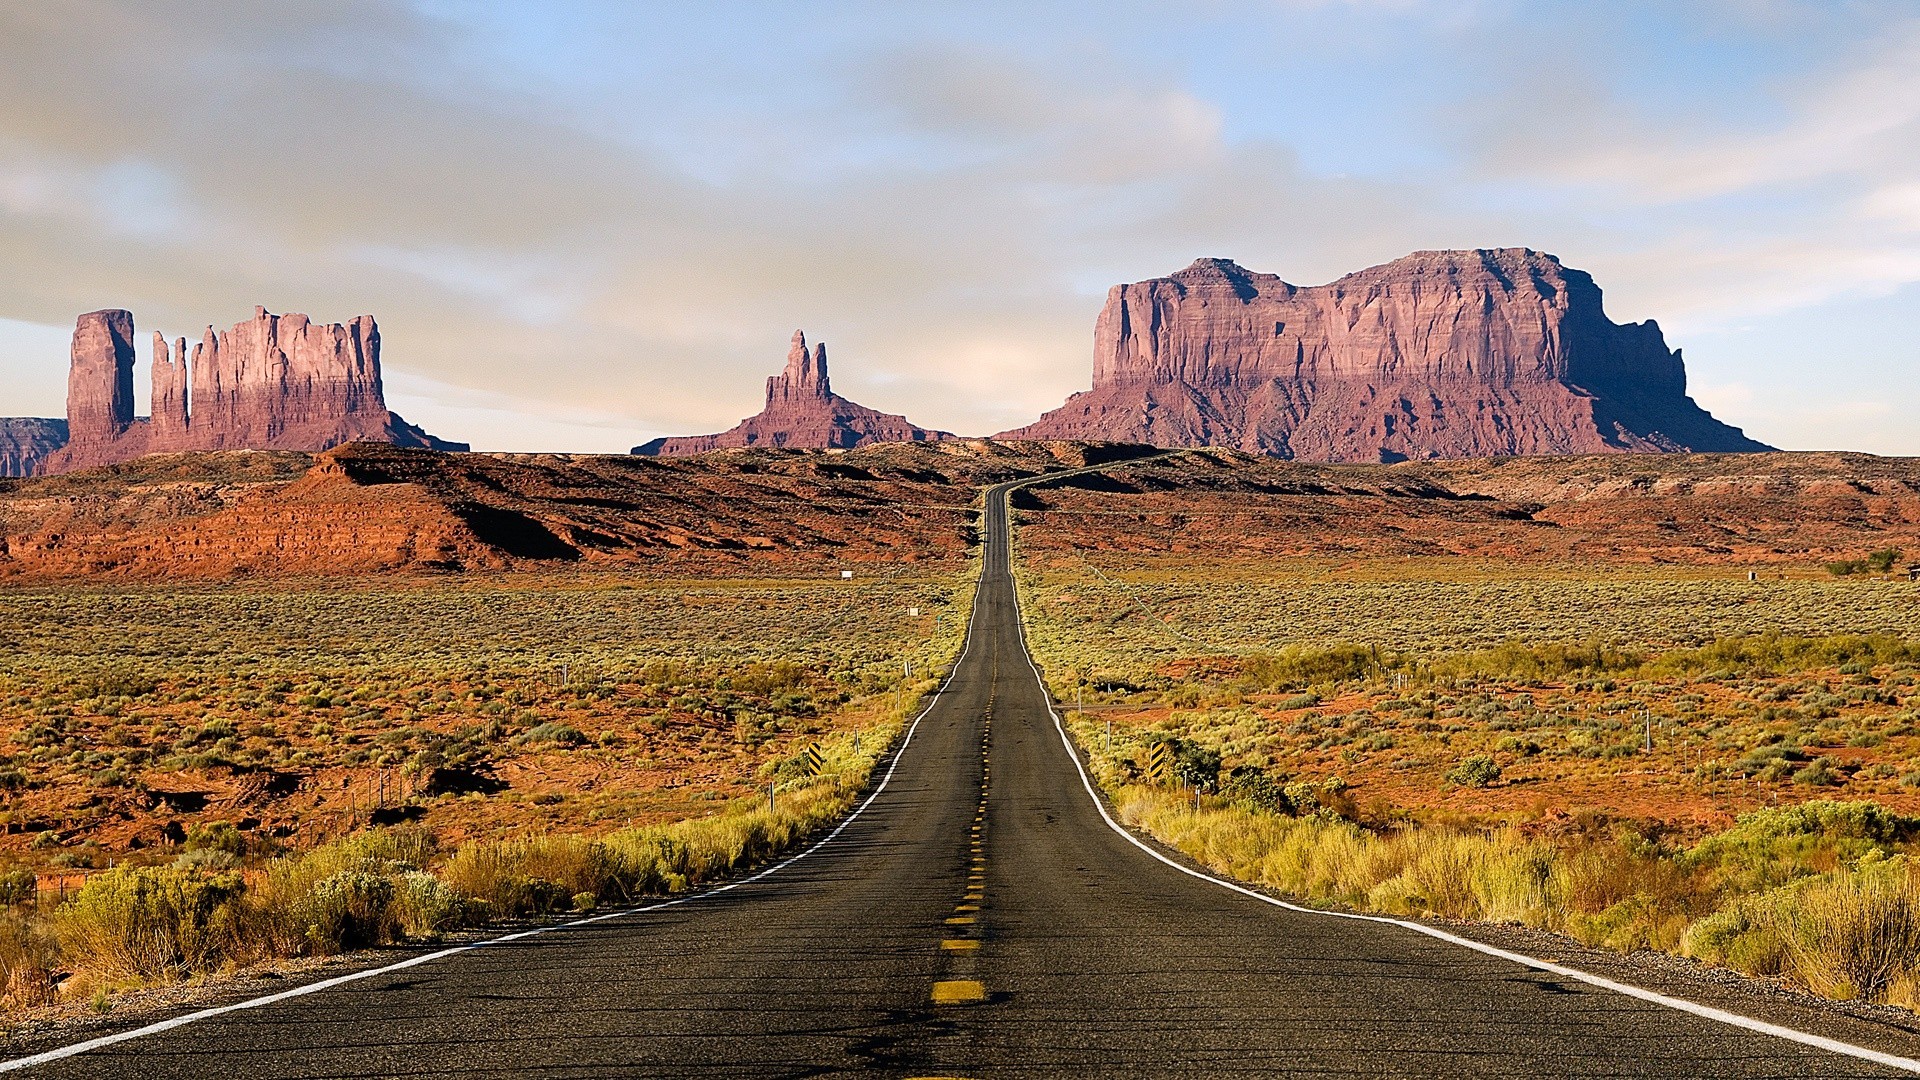 desert travel landscape road sky outdoors sandstone canyon nature scenic mountain arid valley sunset remote rock highway barren dry